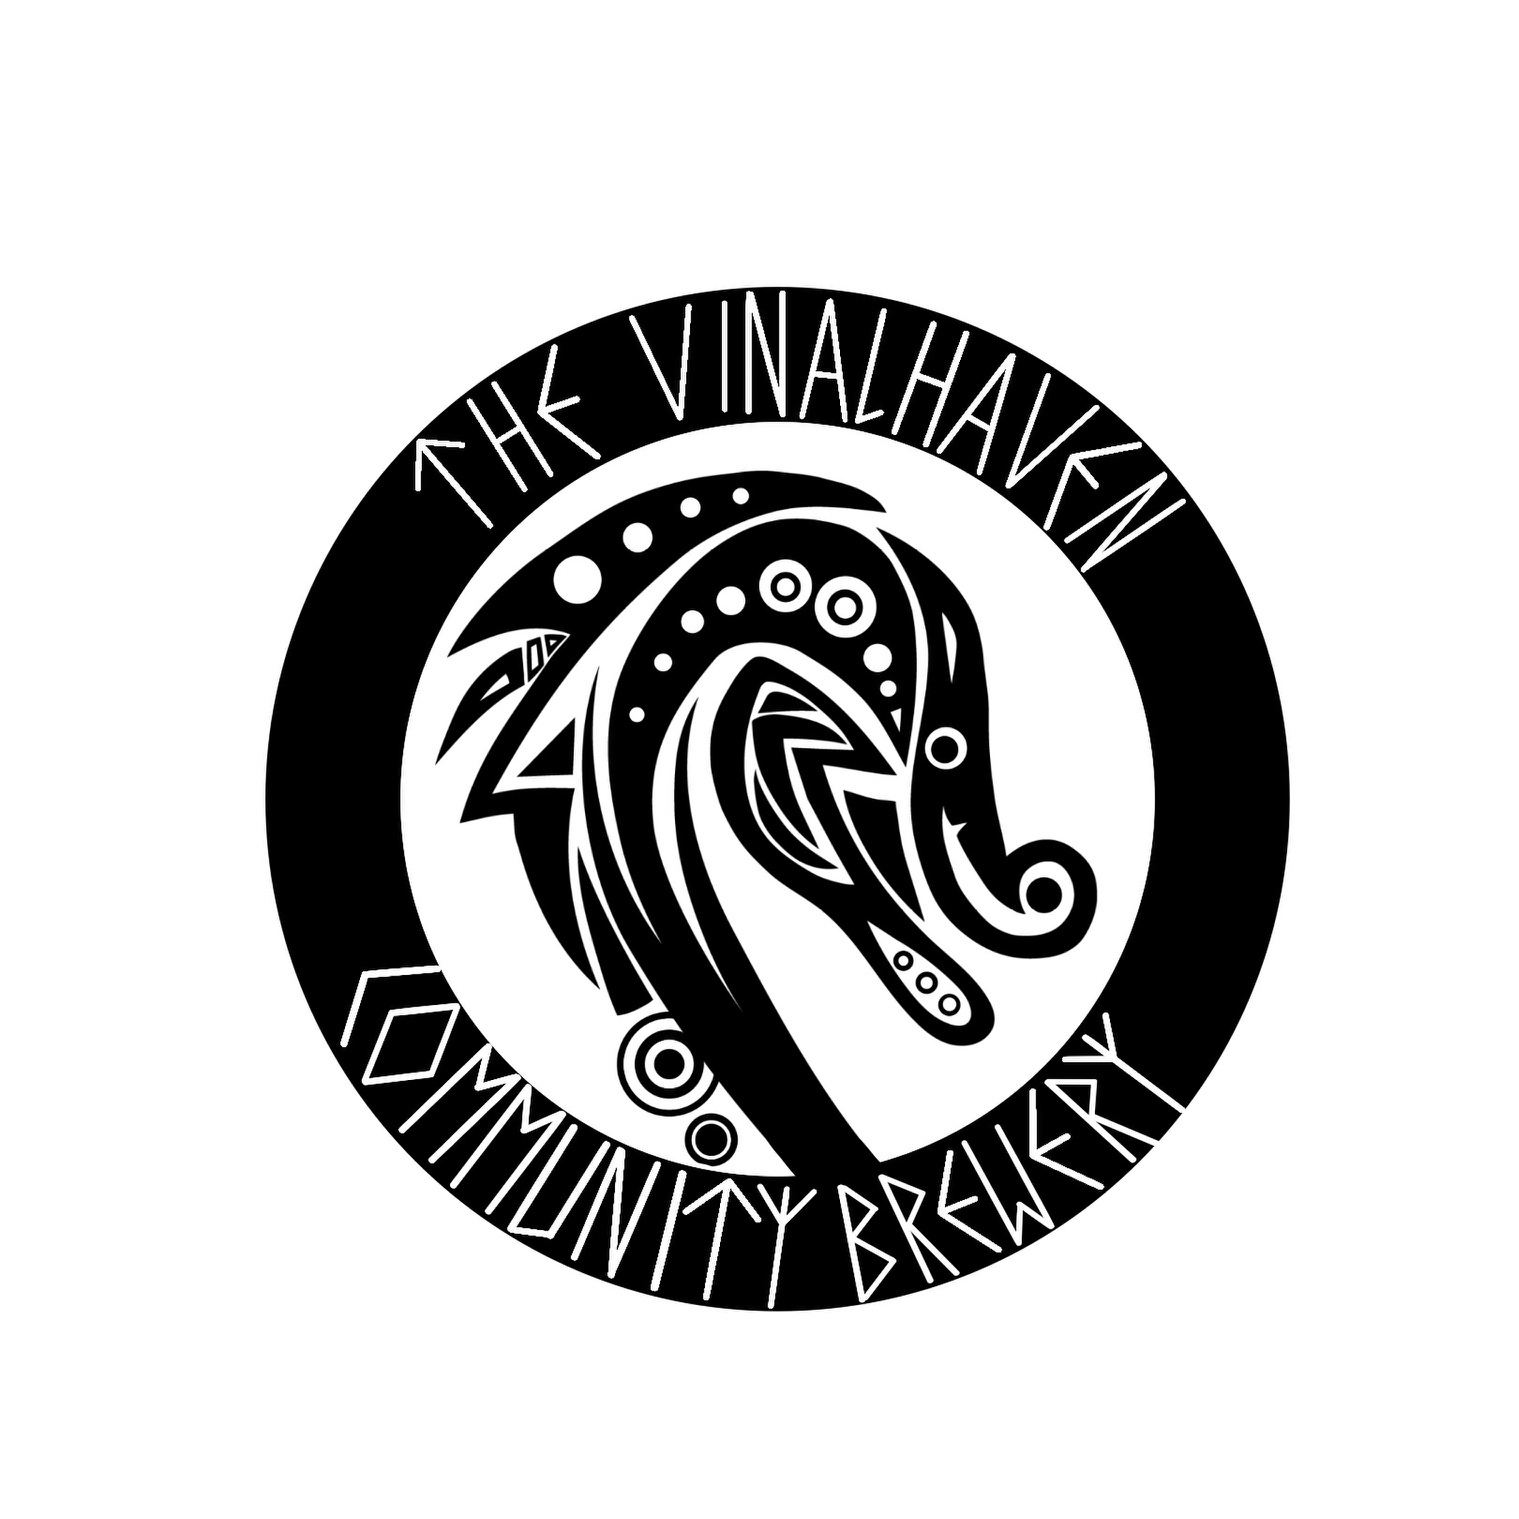 The Vinalhaven Community Brewery